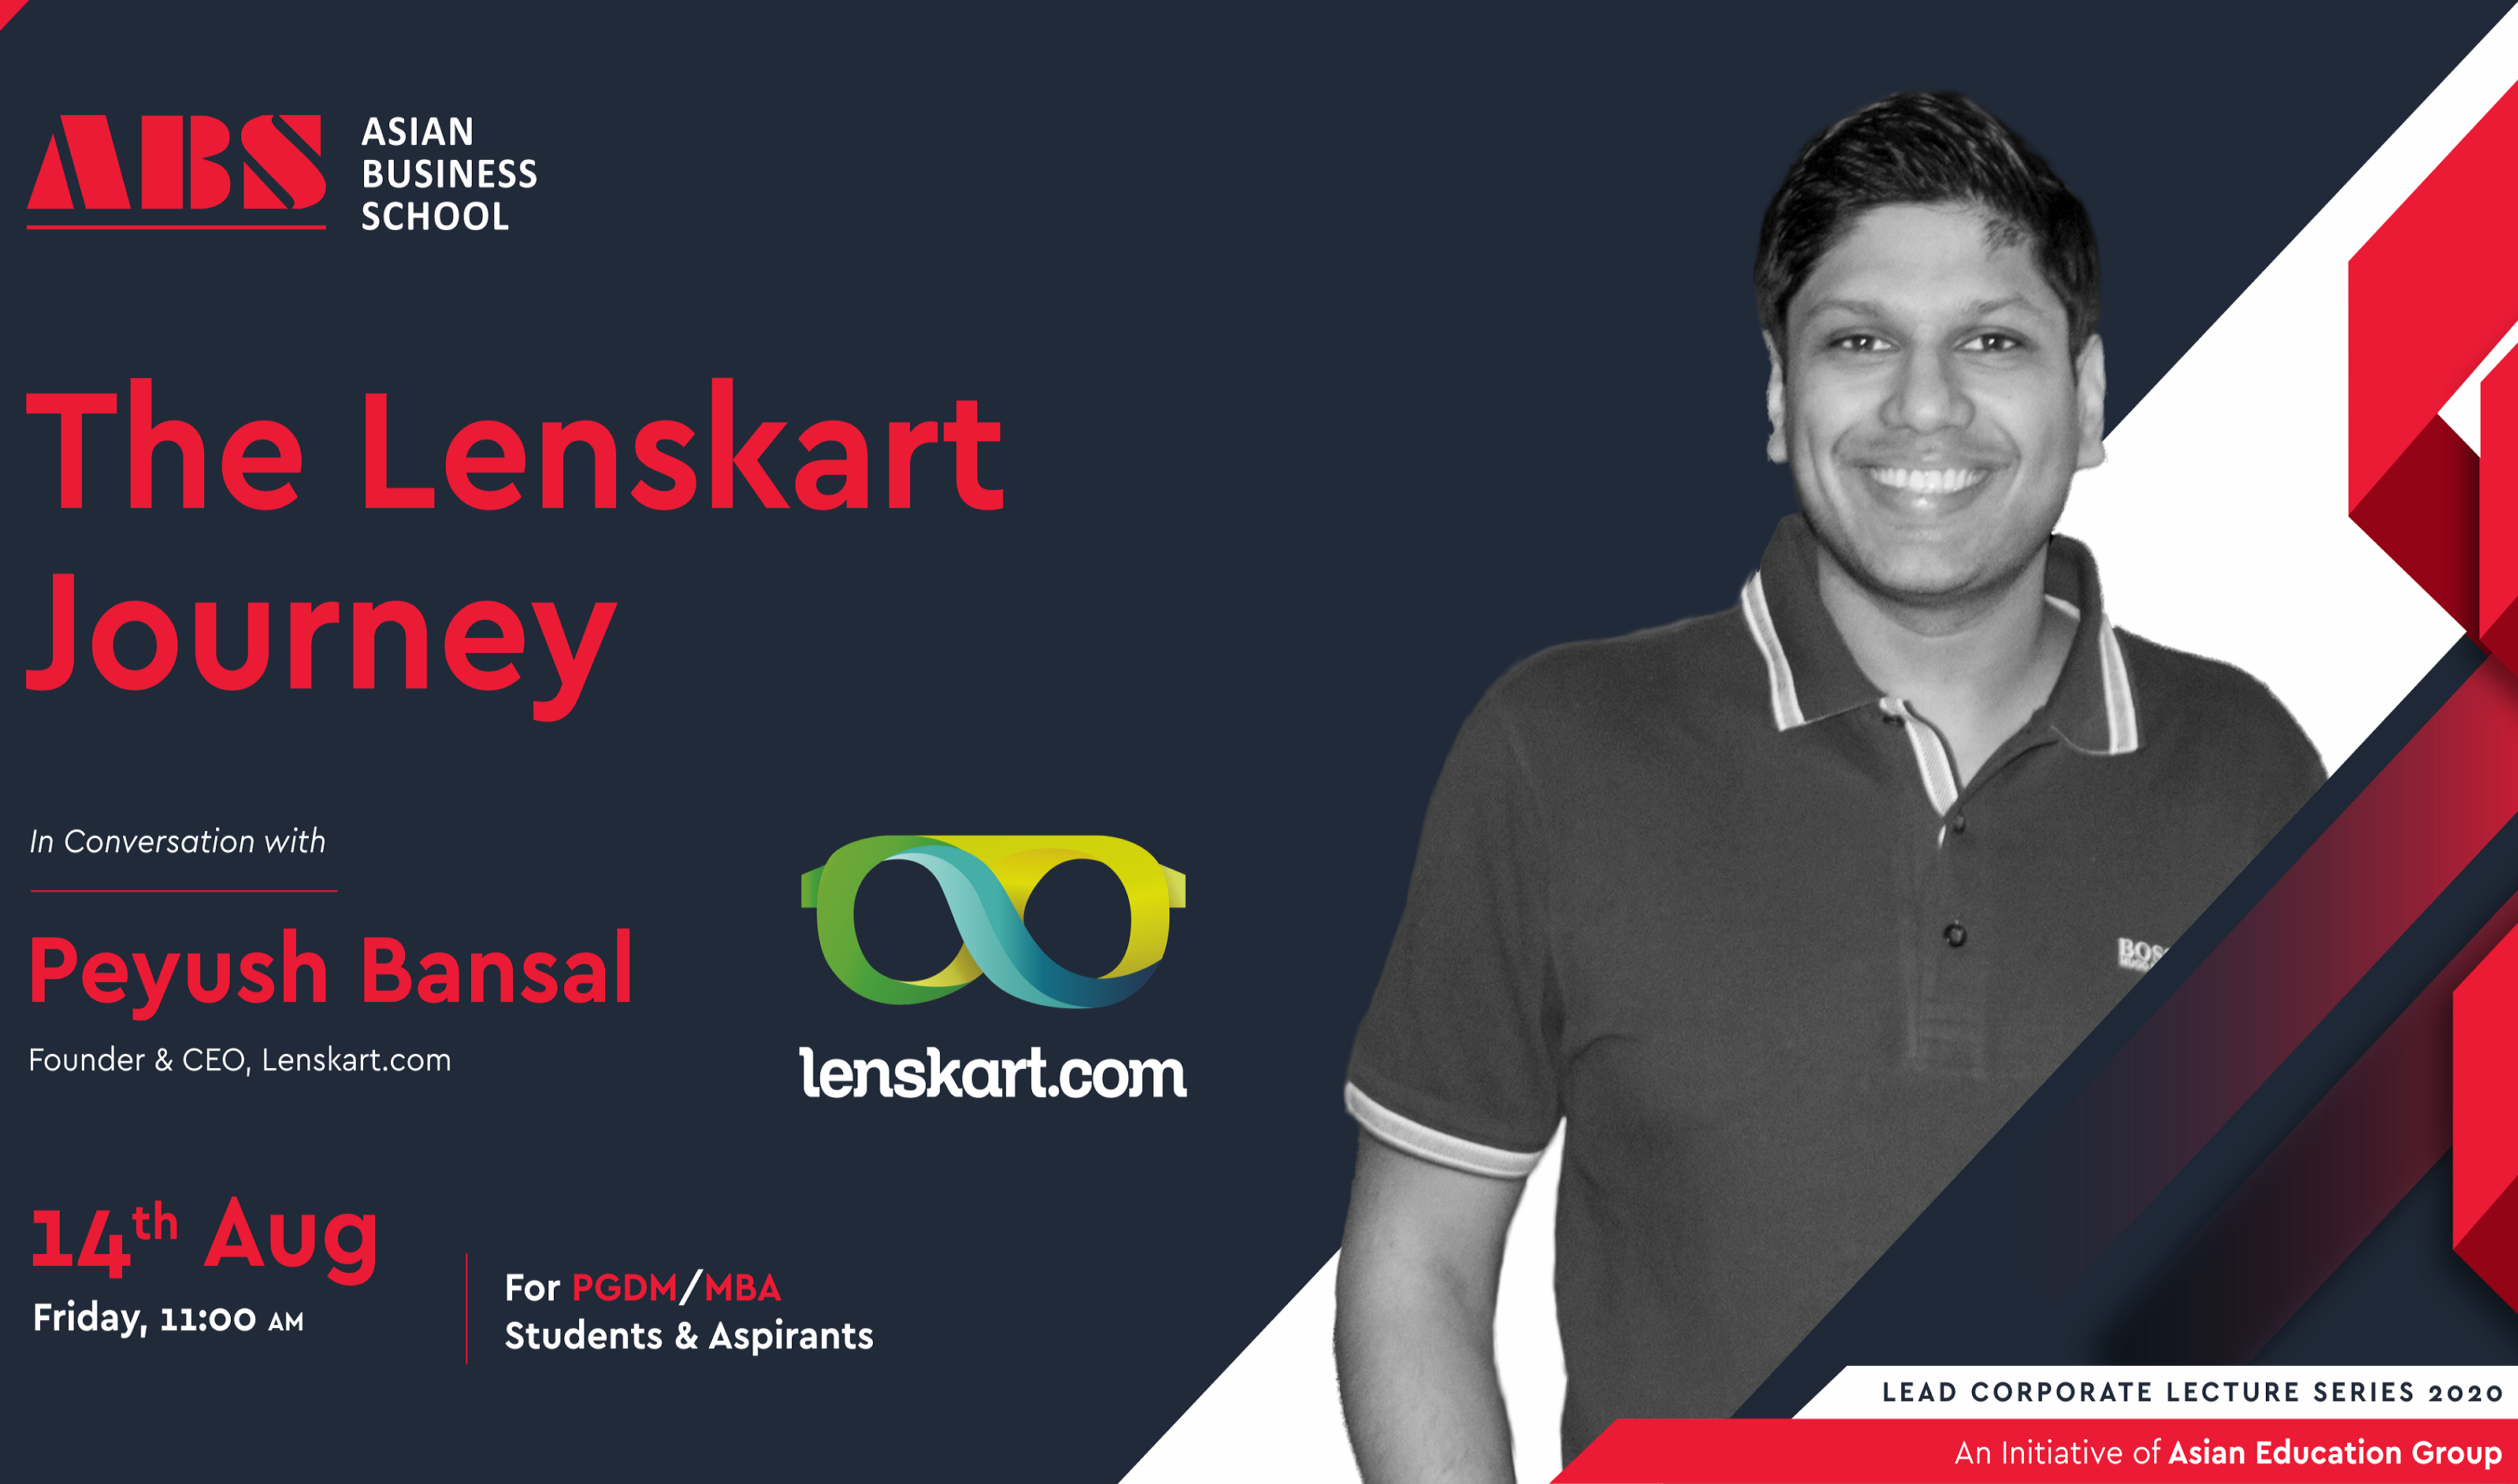 ABS to organize a Live WEBINAR on ‘The Lenskart Journey’ by None Other Than the Lenskart Founder & CEO Peyush Bansal